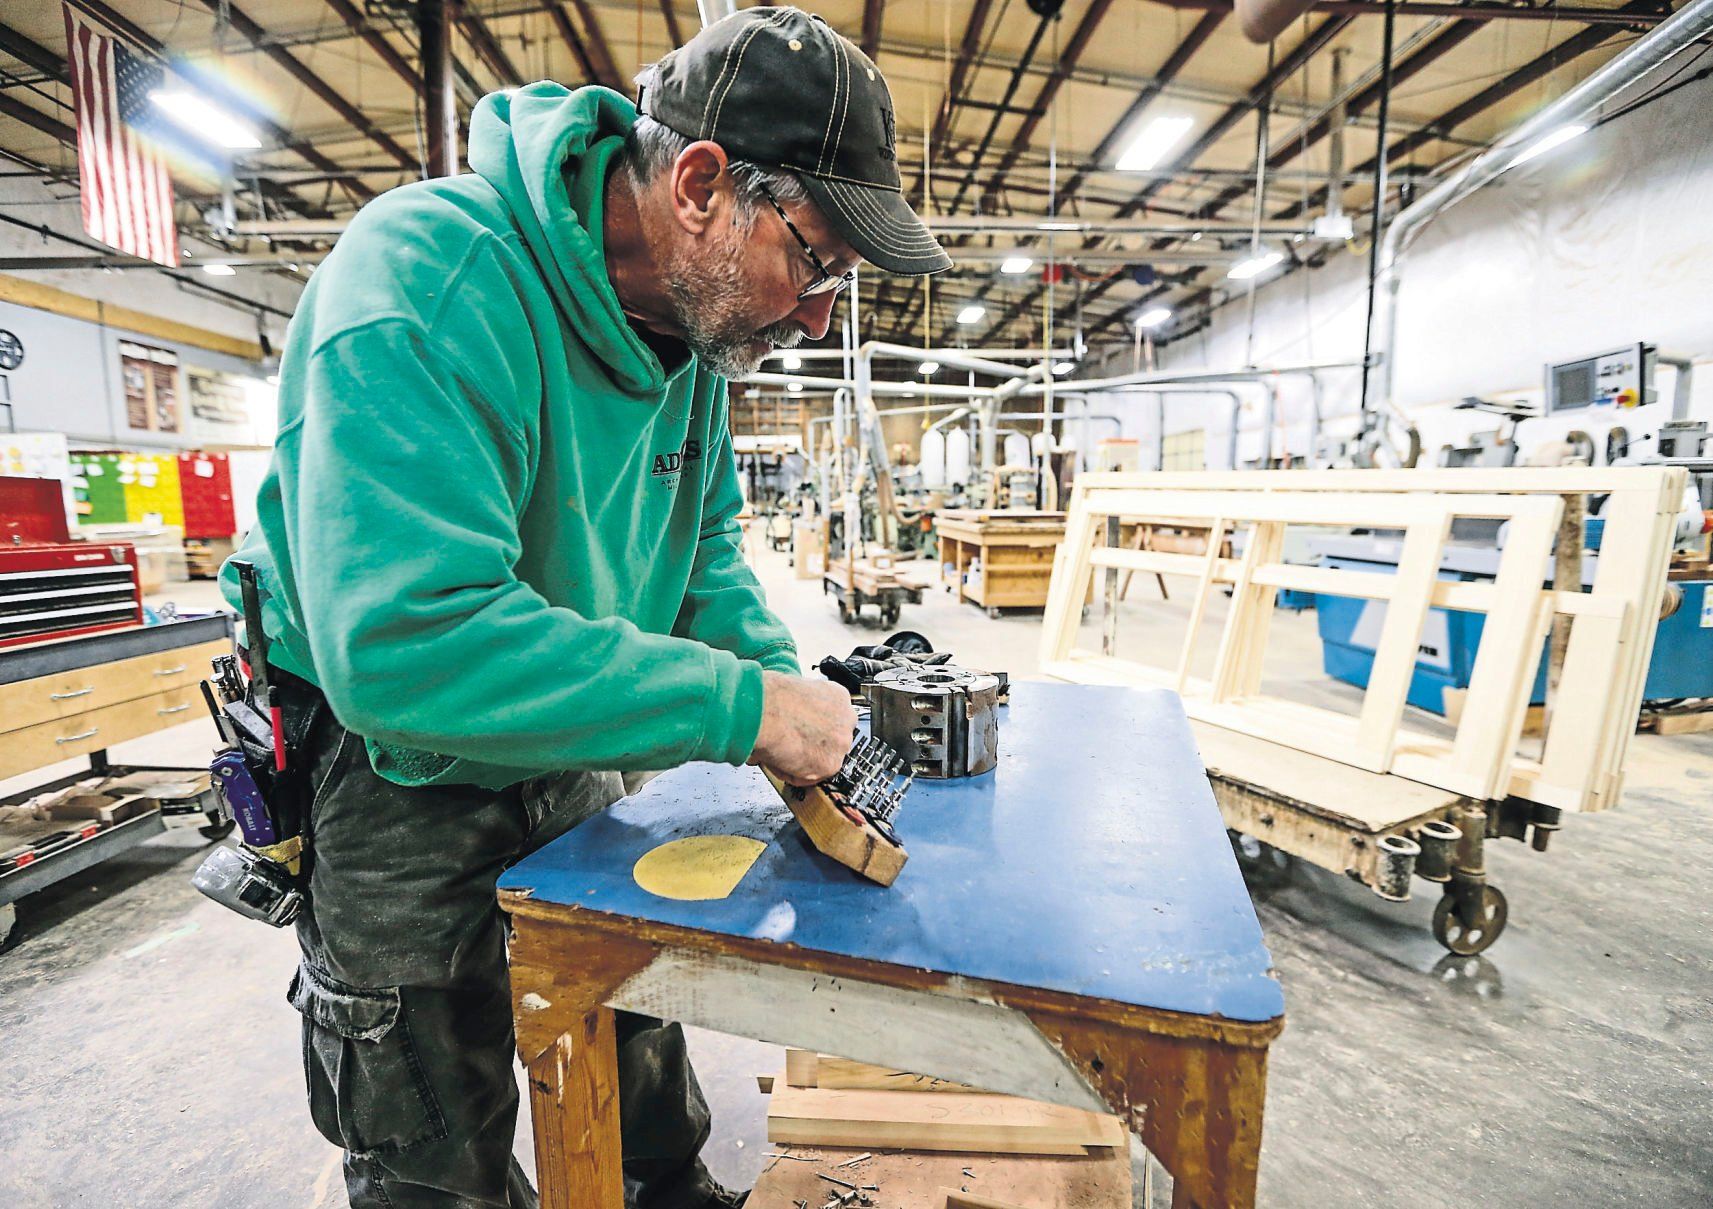 Jon Brachman works on setting up a cutting tool.    PHOTO CREDIT: Dave Kettering